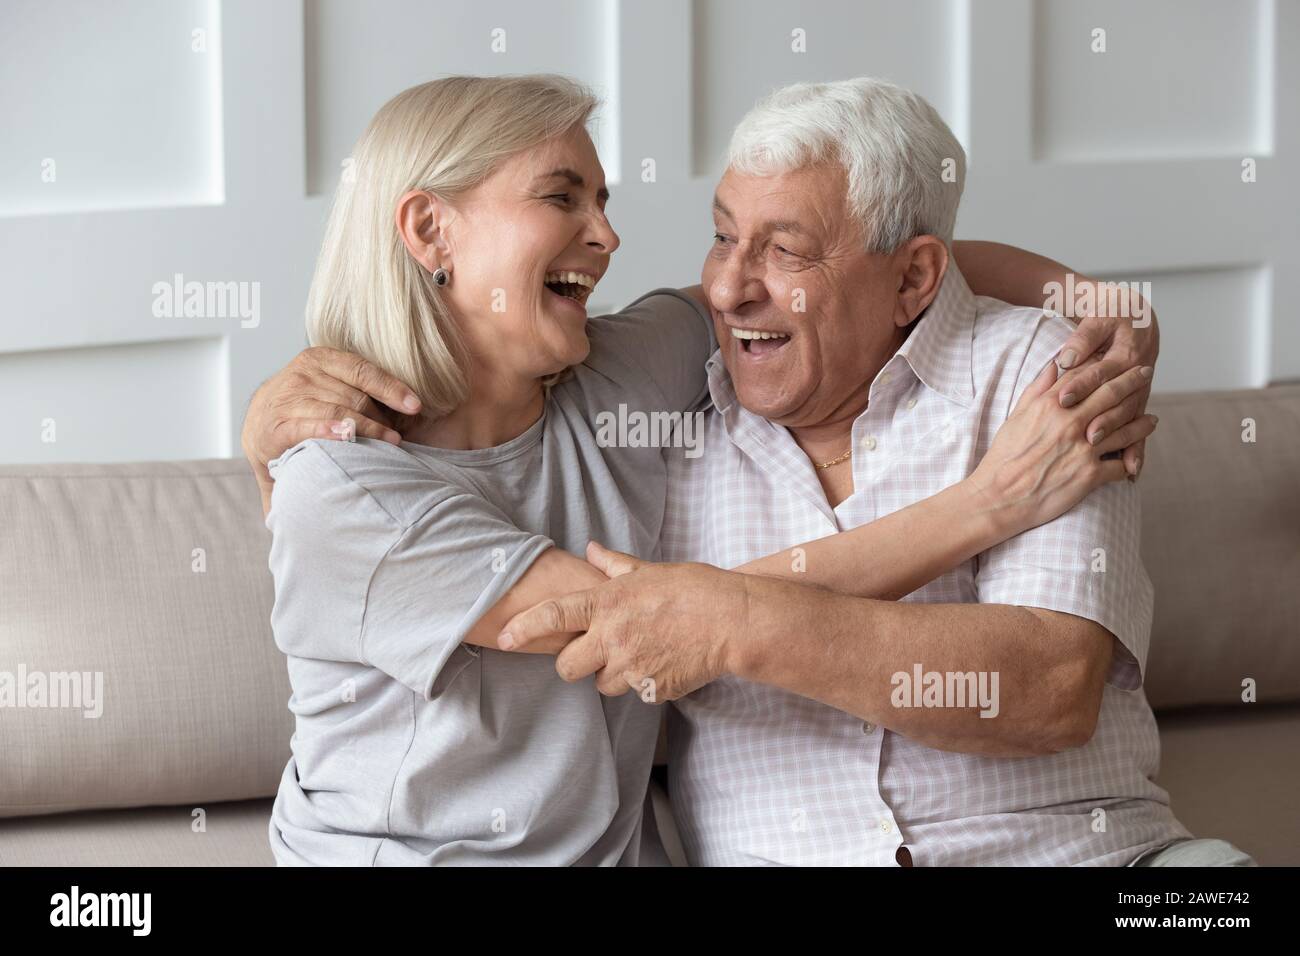 Funny elderly couple have fun laughing cuddling at home Stock Photo